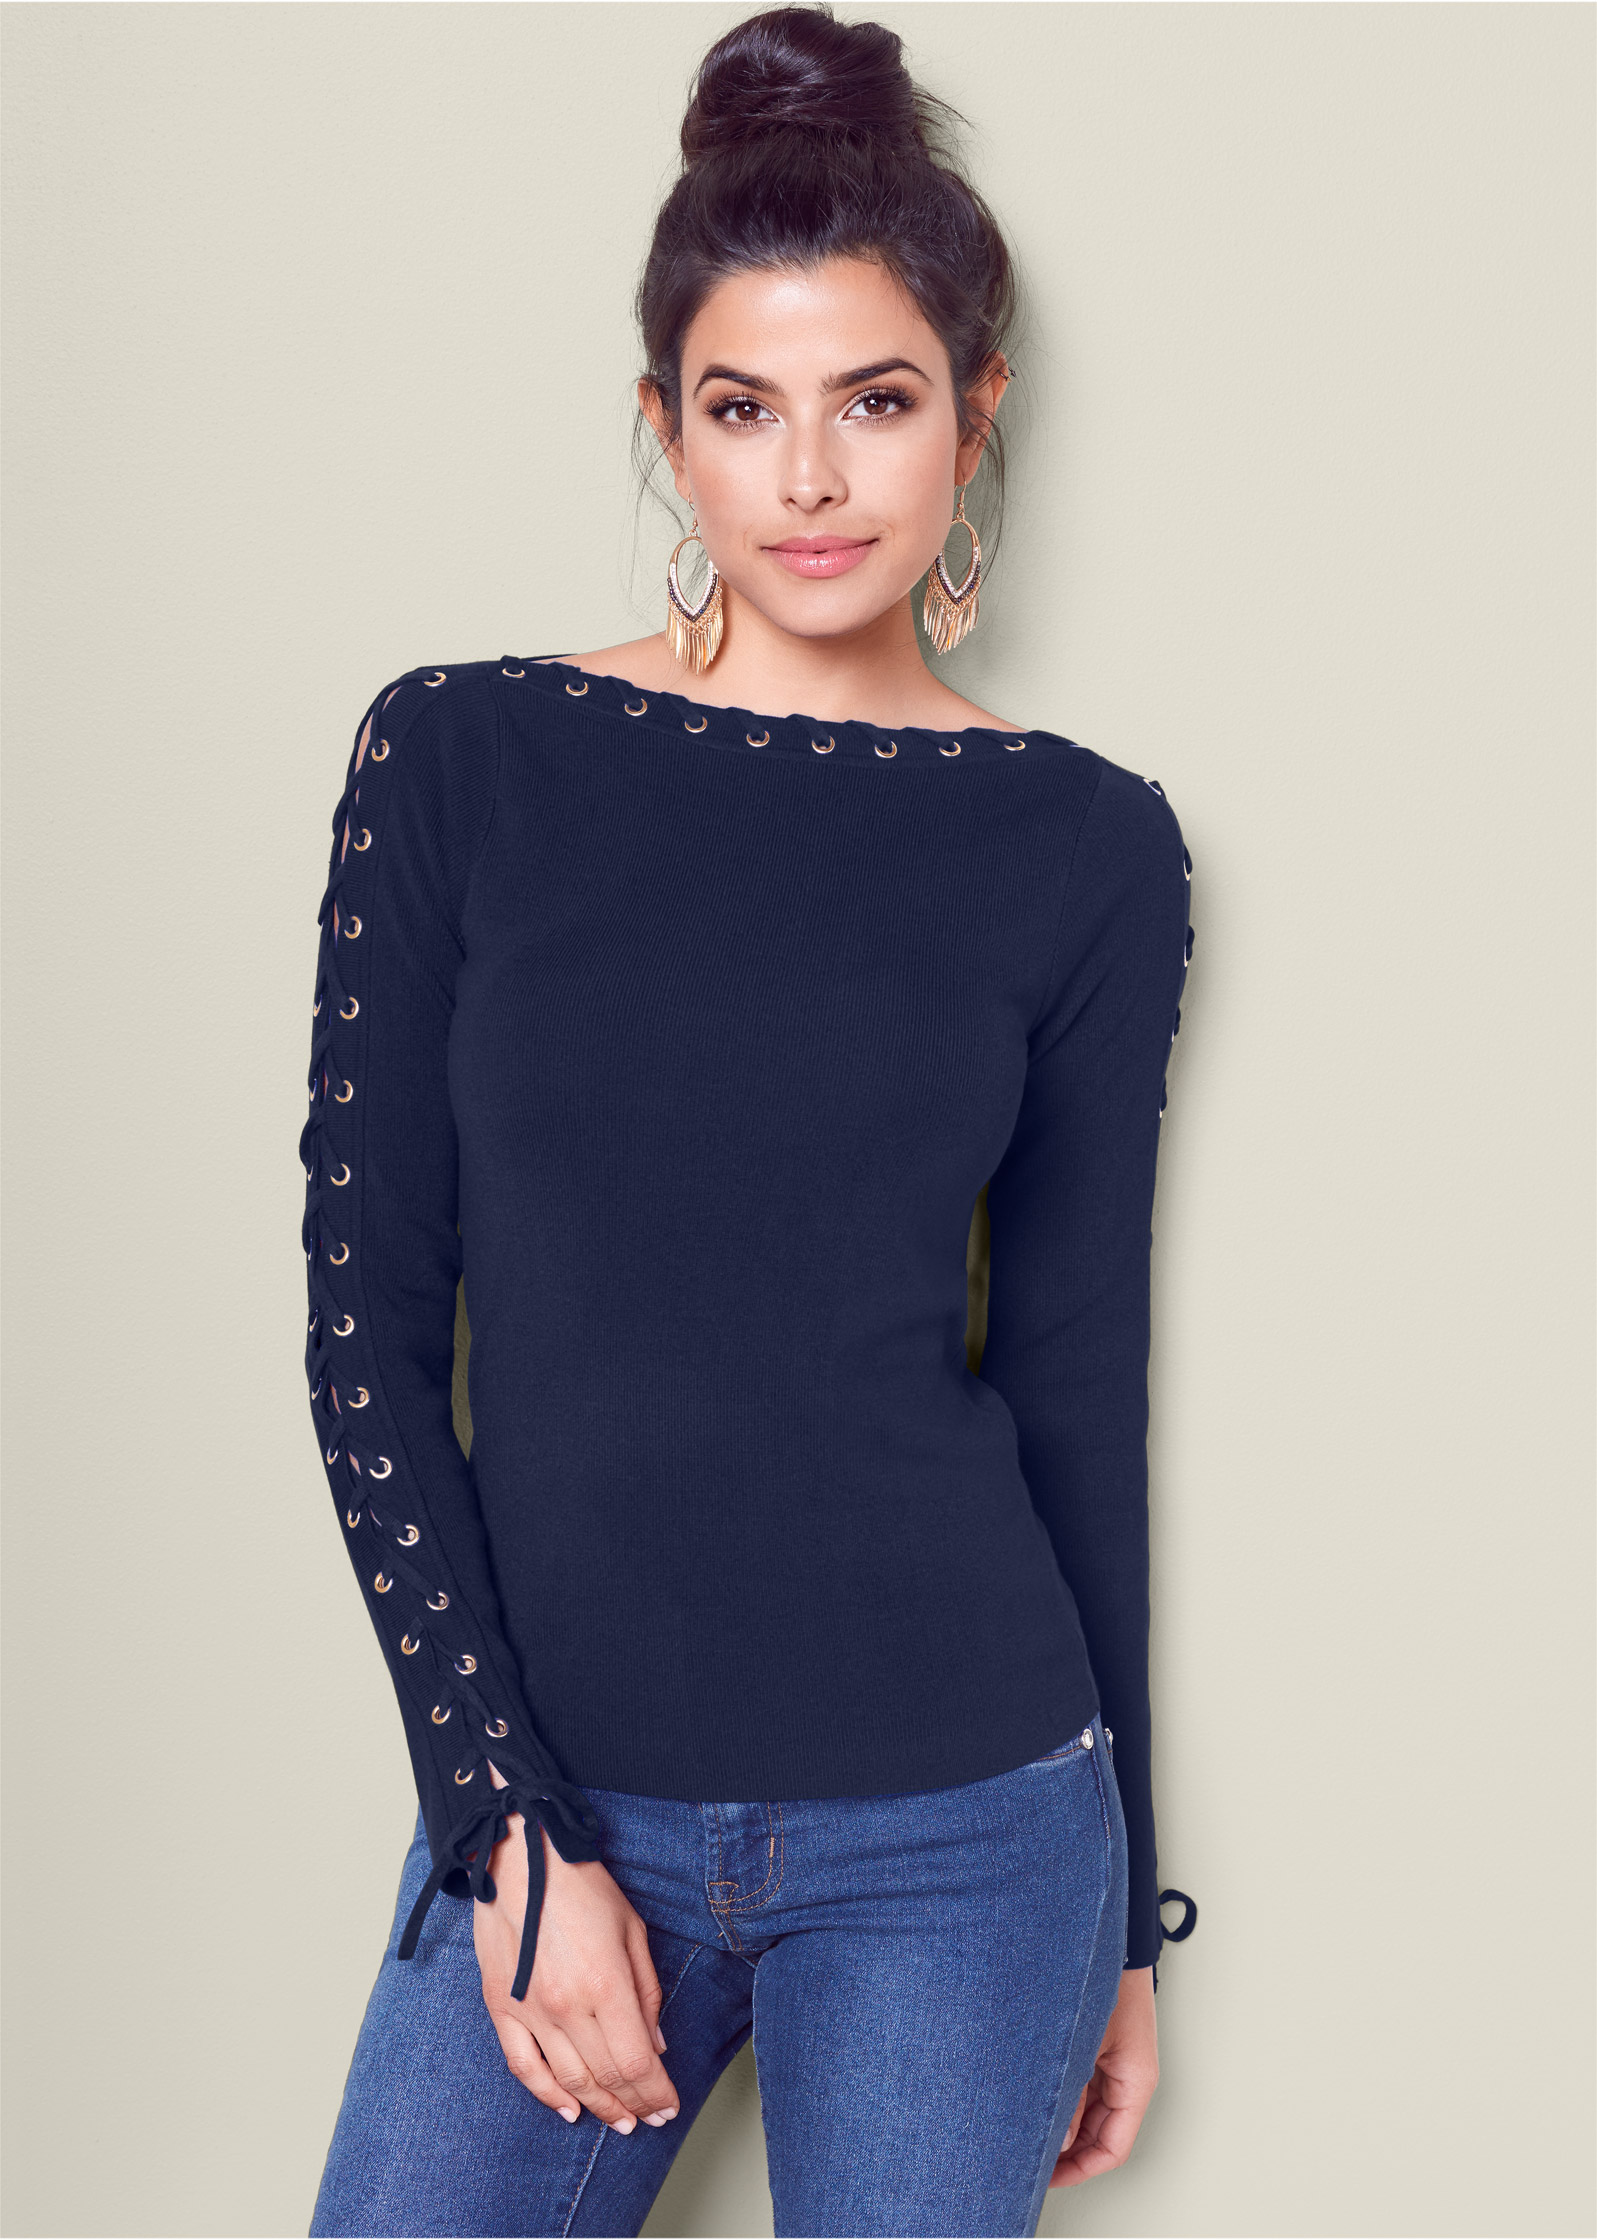 VENUS | LACE UP BOAT NECK SWEATER in Navy